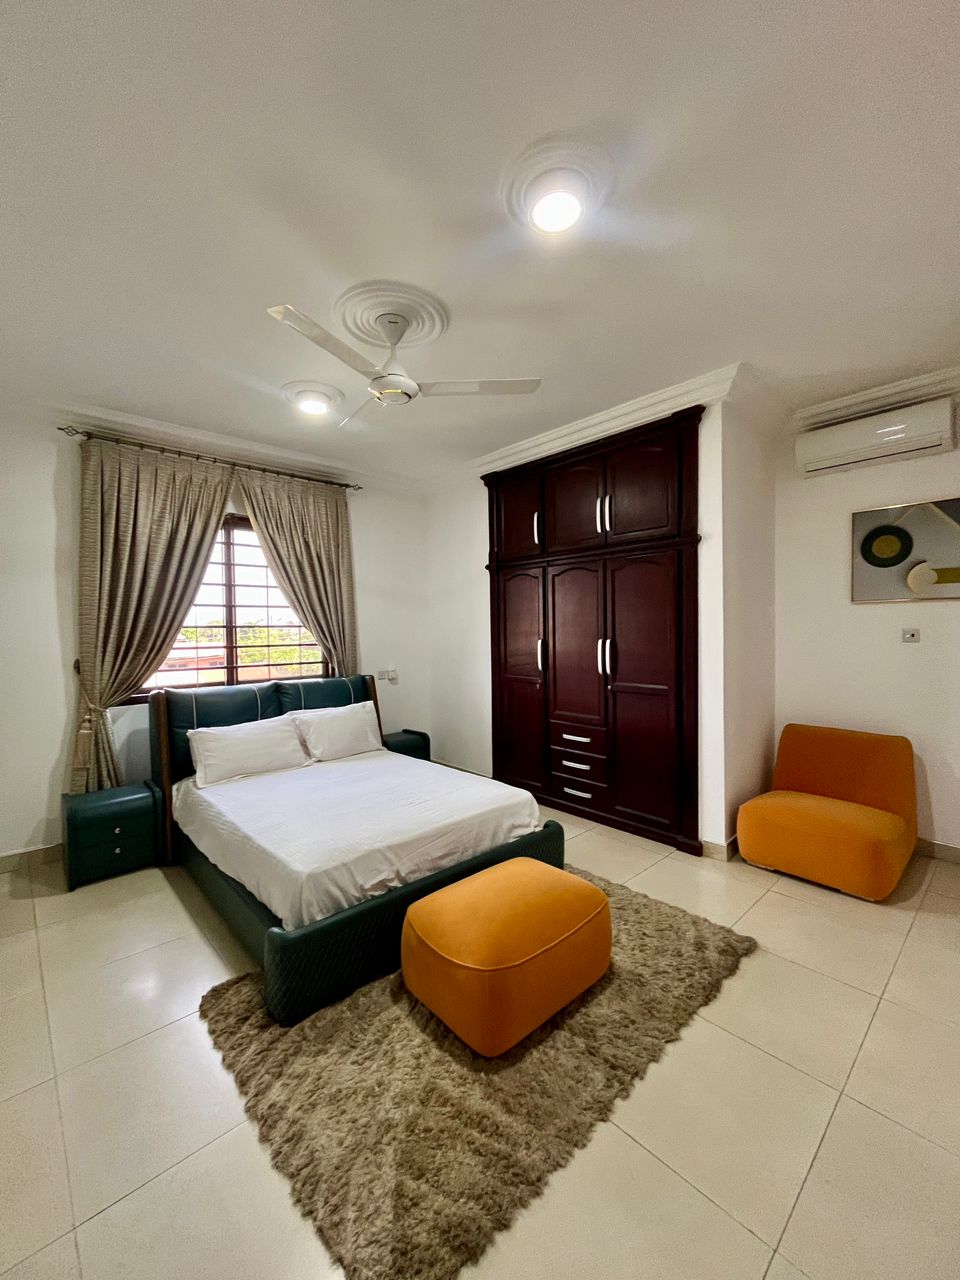 Fully Furnished 3-bedroom Apartment for Rent at Adenta (Along the main Accra-Aburi road)